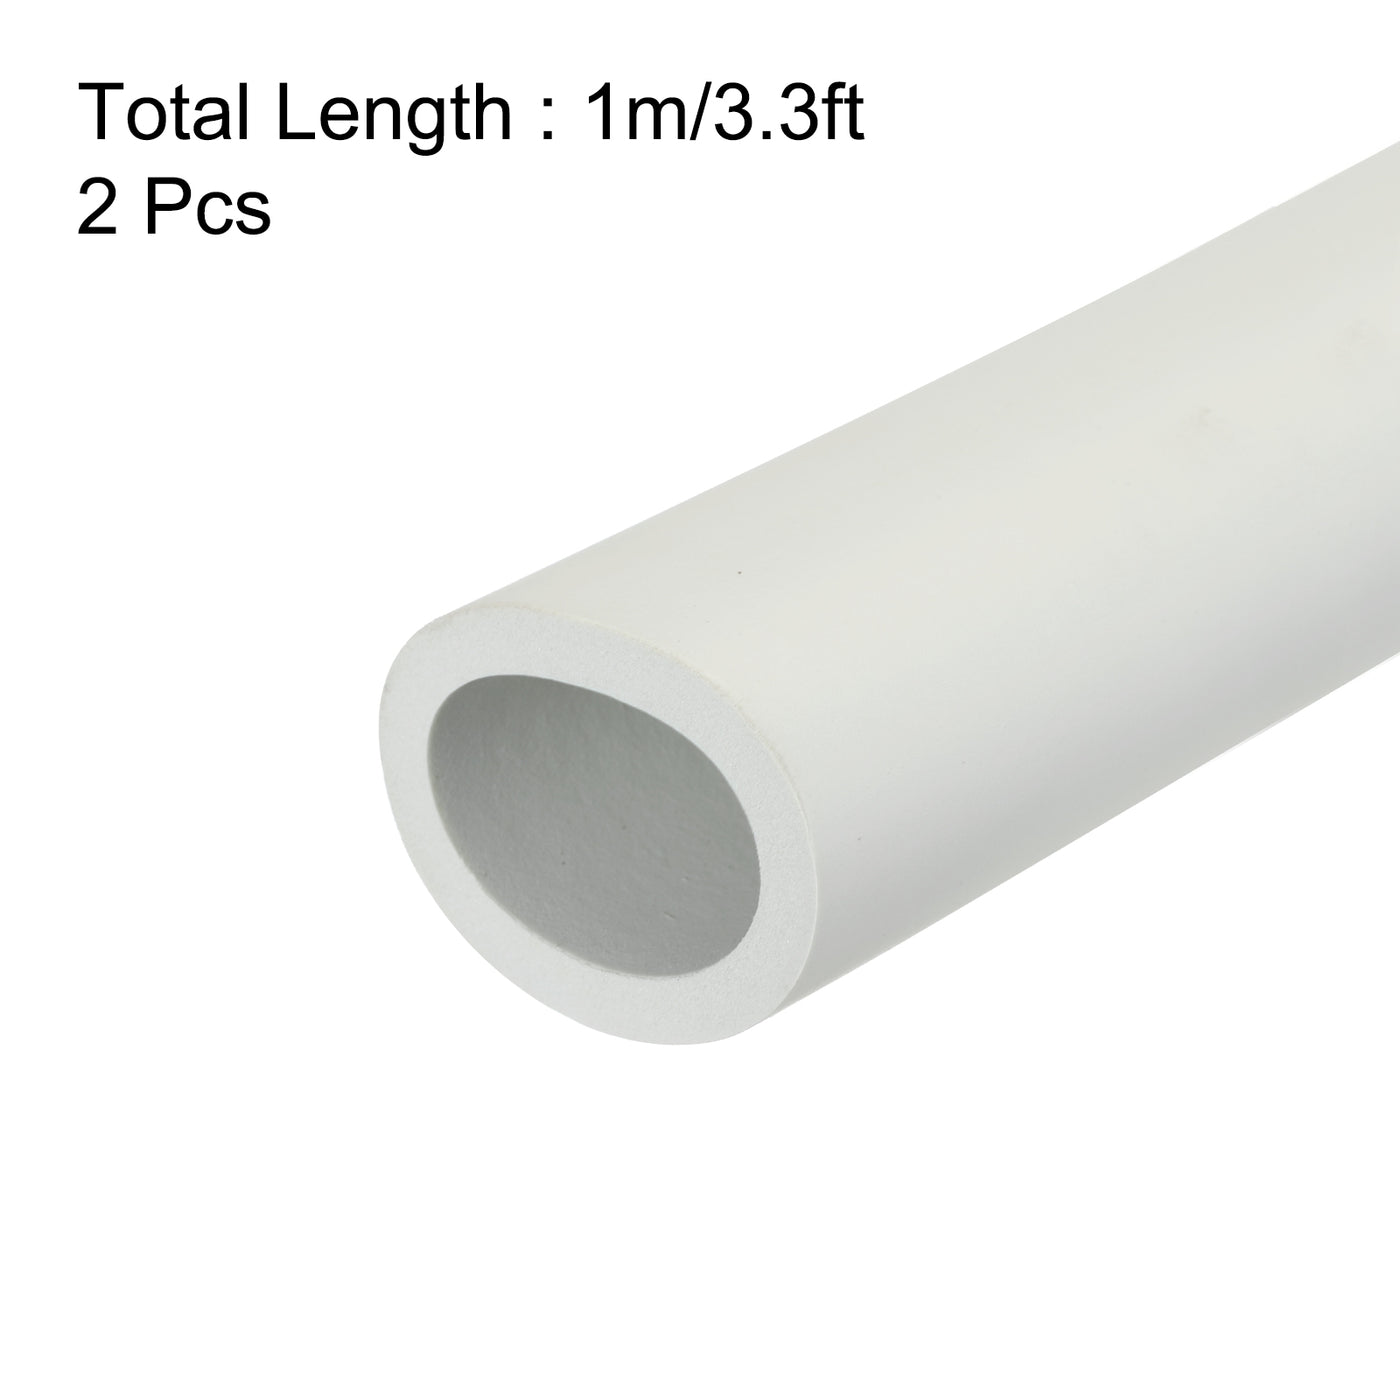 uxcell Uxcell 2pcs 3.3ft Pipe Insulation Tube 1 1/4 Inch(32mm) ID 44mm OD Foam Tubing for Handle Grip Support, White